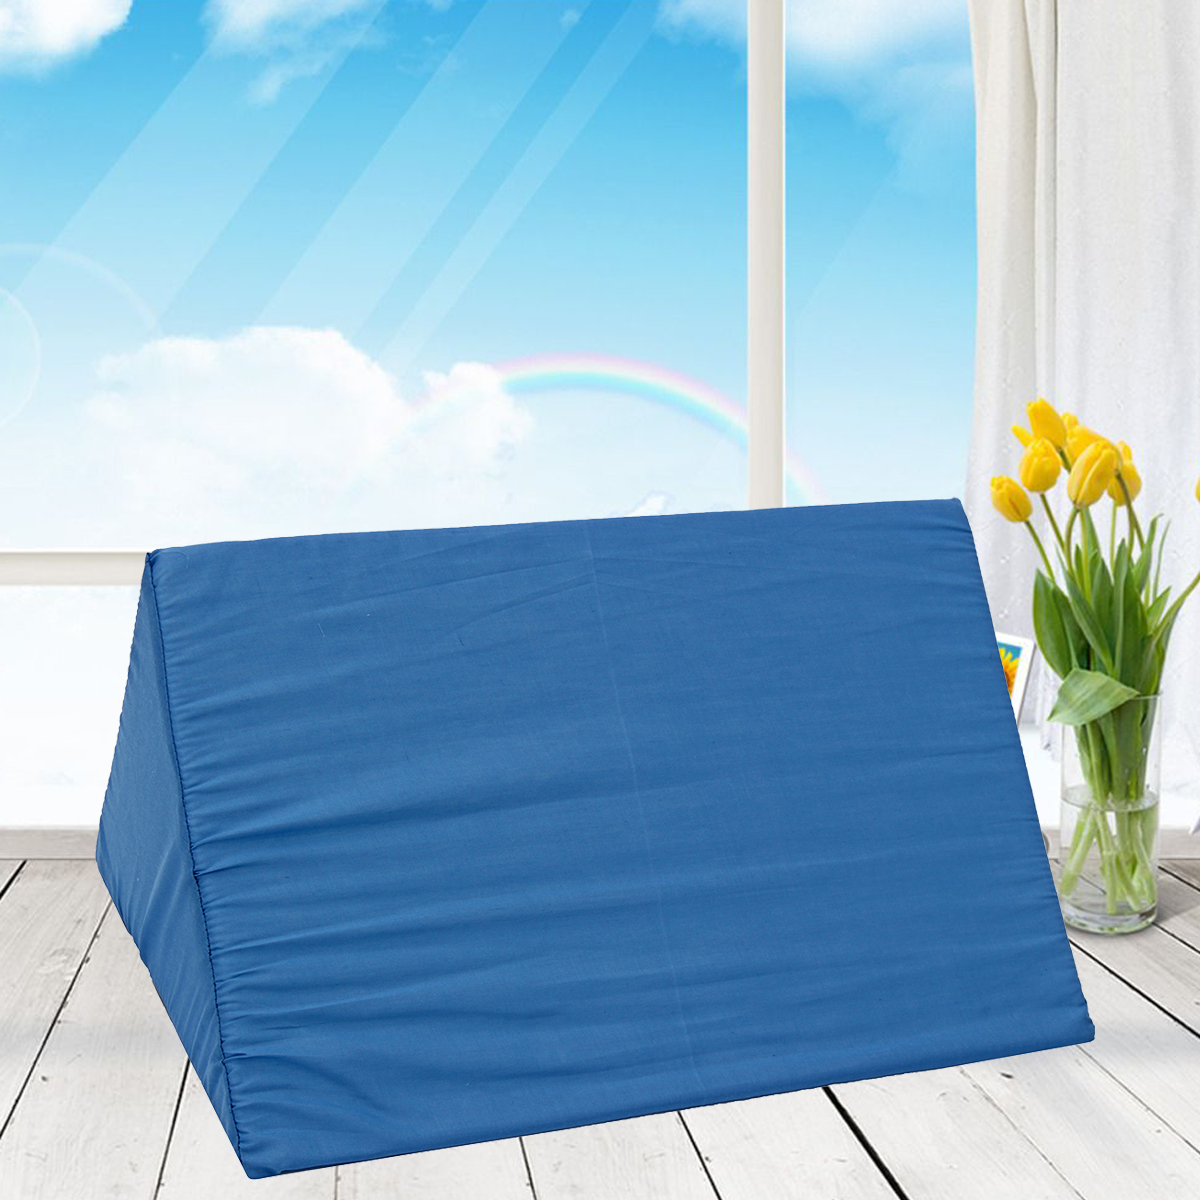 Memory-Foam-Orthopedic-Acid-Reflux-Bed-Wedge-Pillow-Back-Leg-Elevation-Cushion-Support-Cover-Pad-1361893